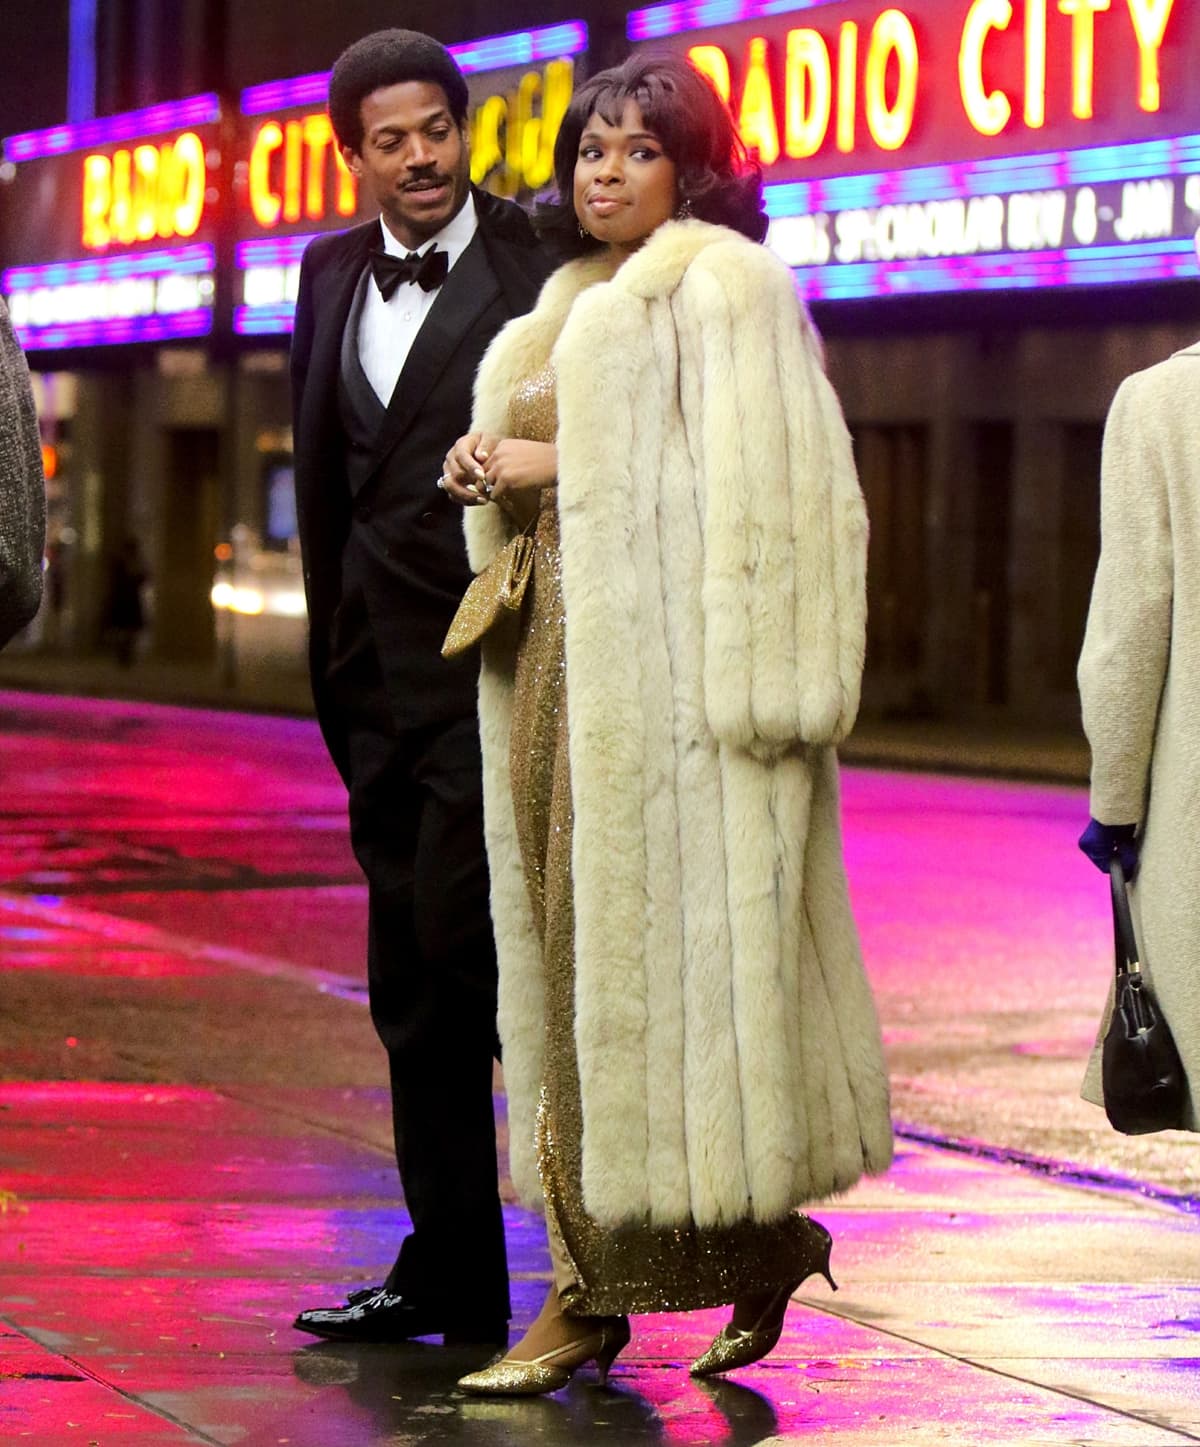 Jennifer Hudson as Aretha Franklin and Marlon Wayans as Aretha's abusive husband and manager Ted White filming on location for "Respect"